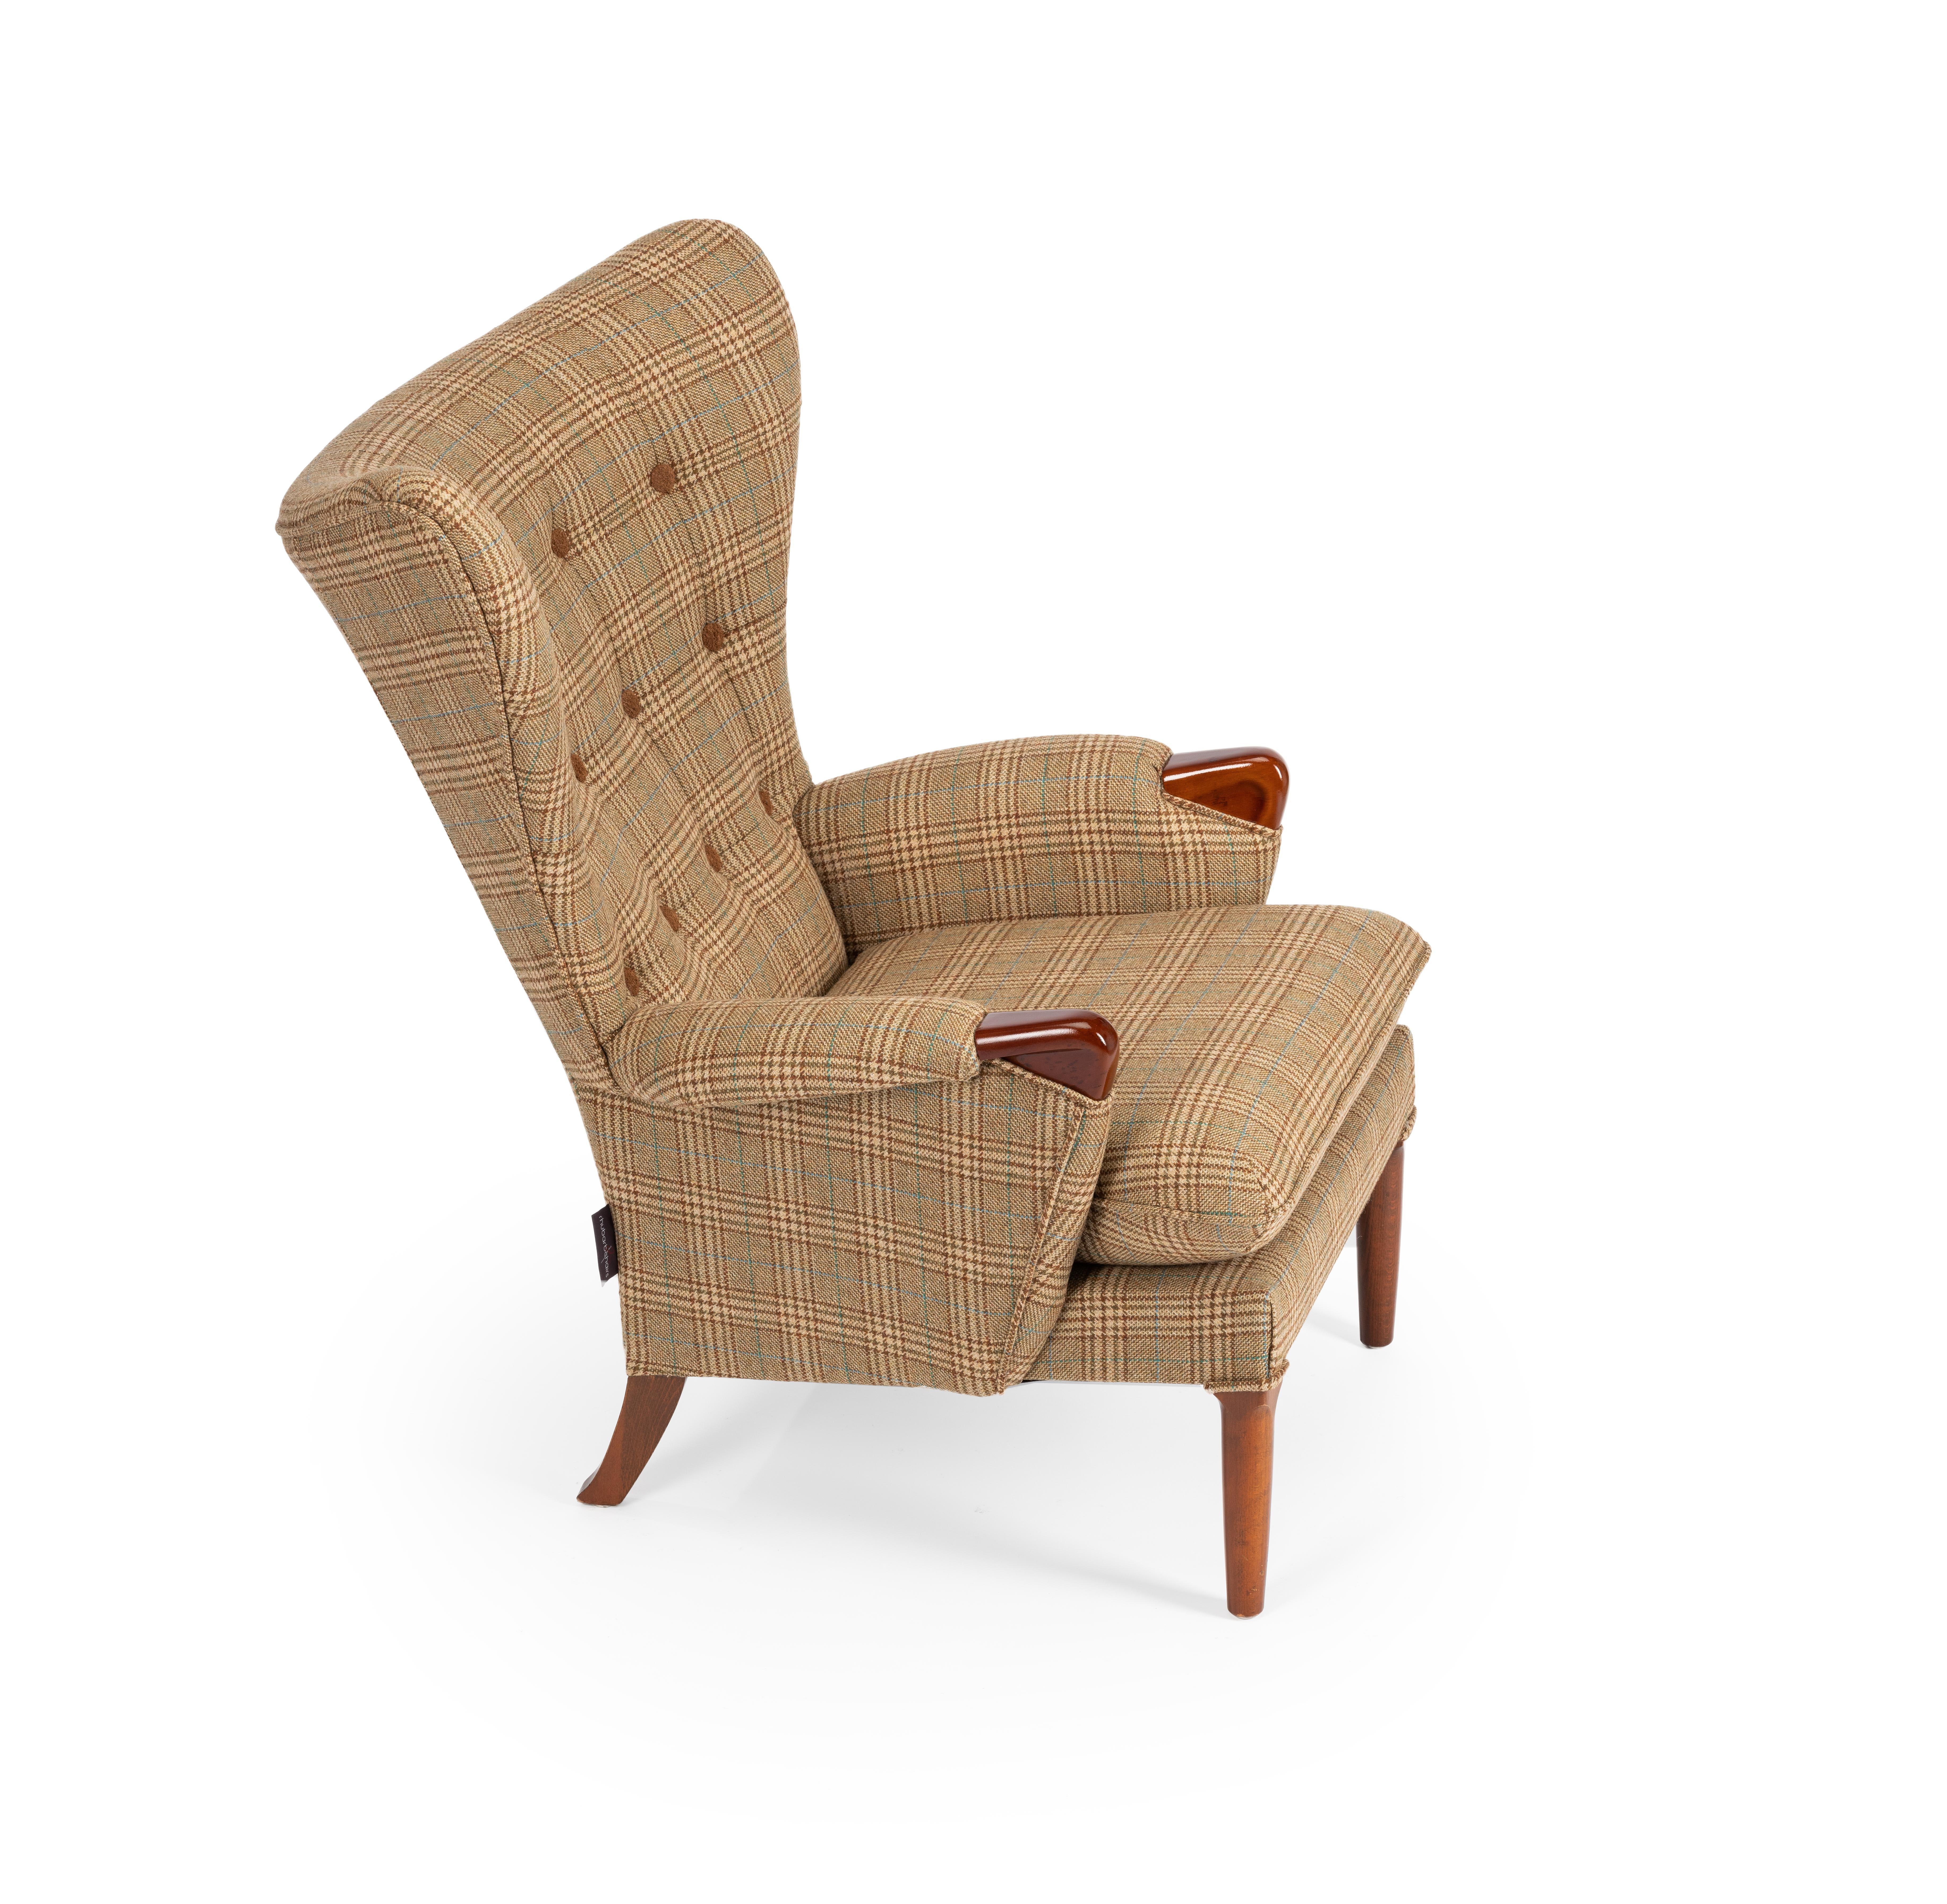 Mahogany Midcentury Vintage Wingback Chairs Reupholstered in Yorkshire Tweed, circa 1960s